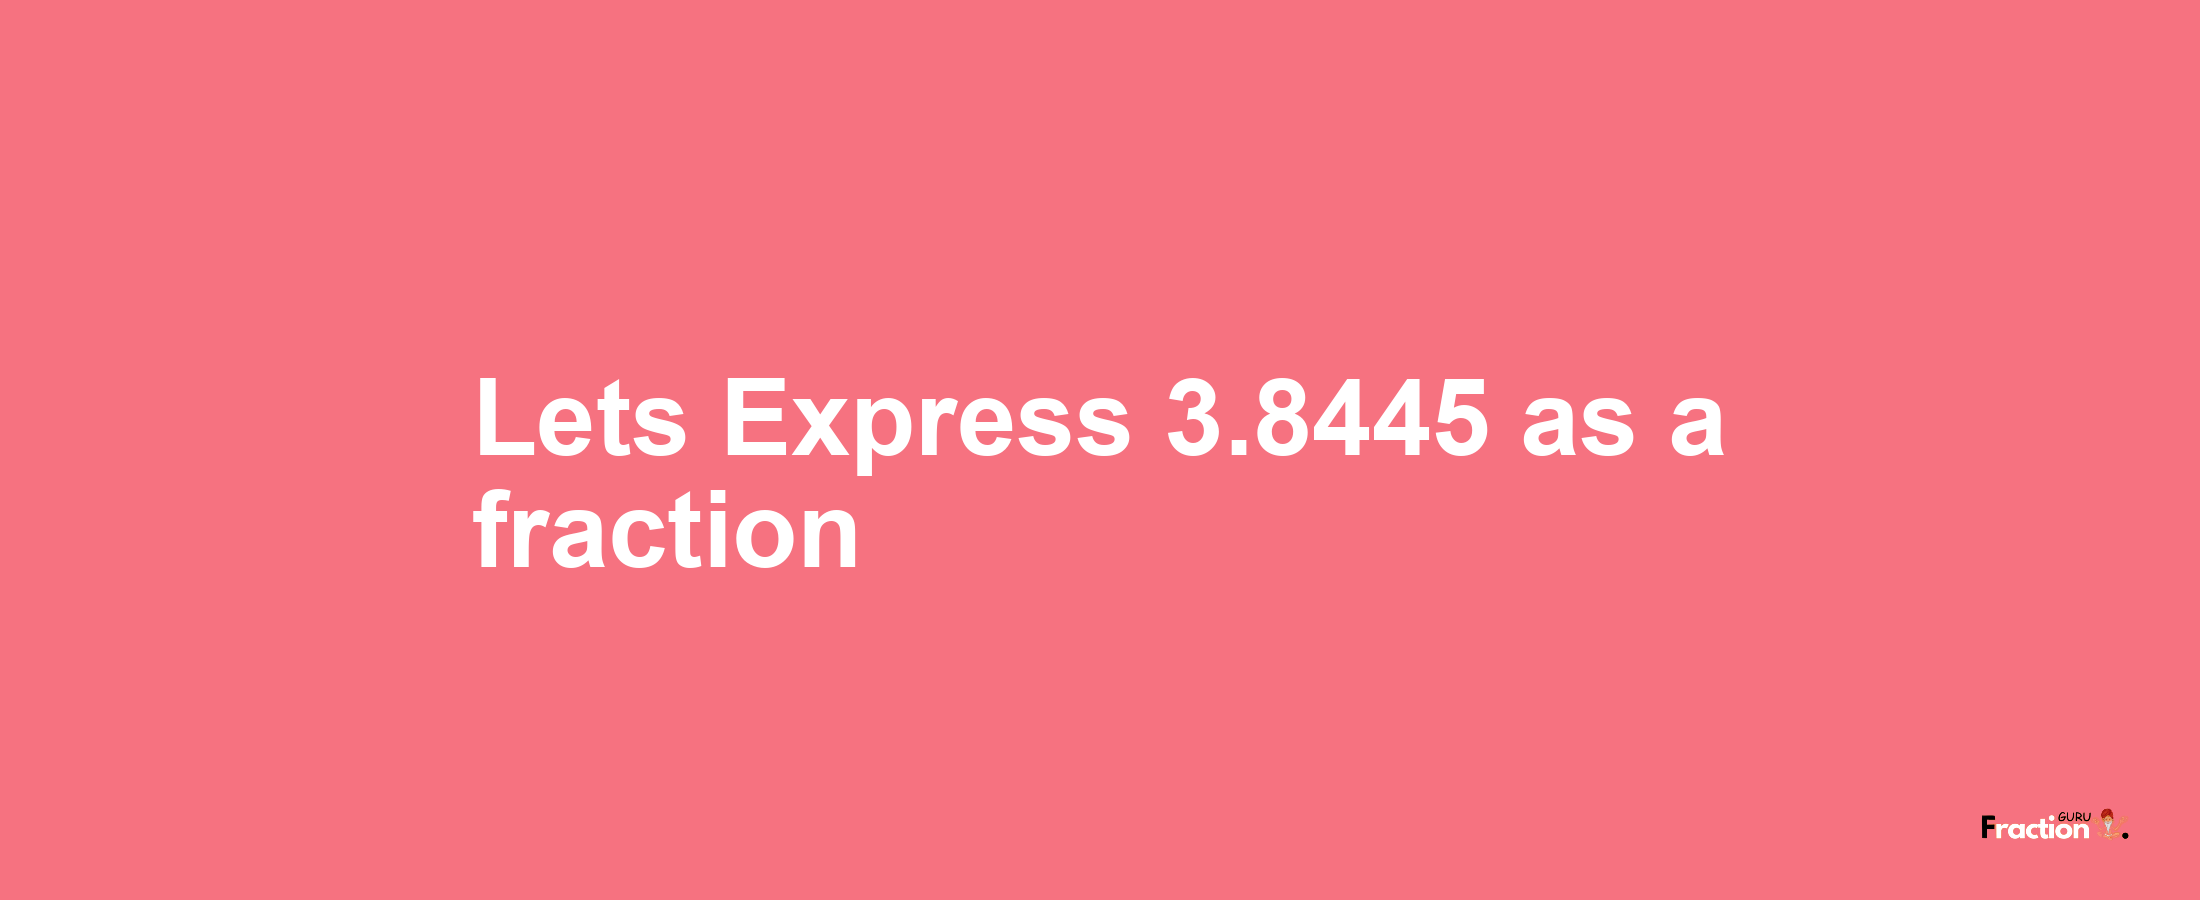 Lets Express 3.8445 as afraction